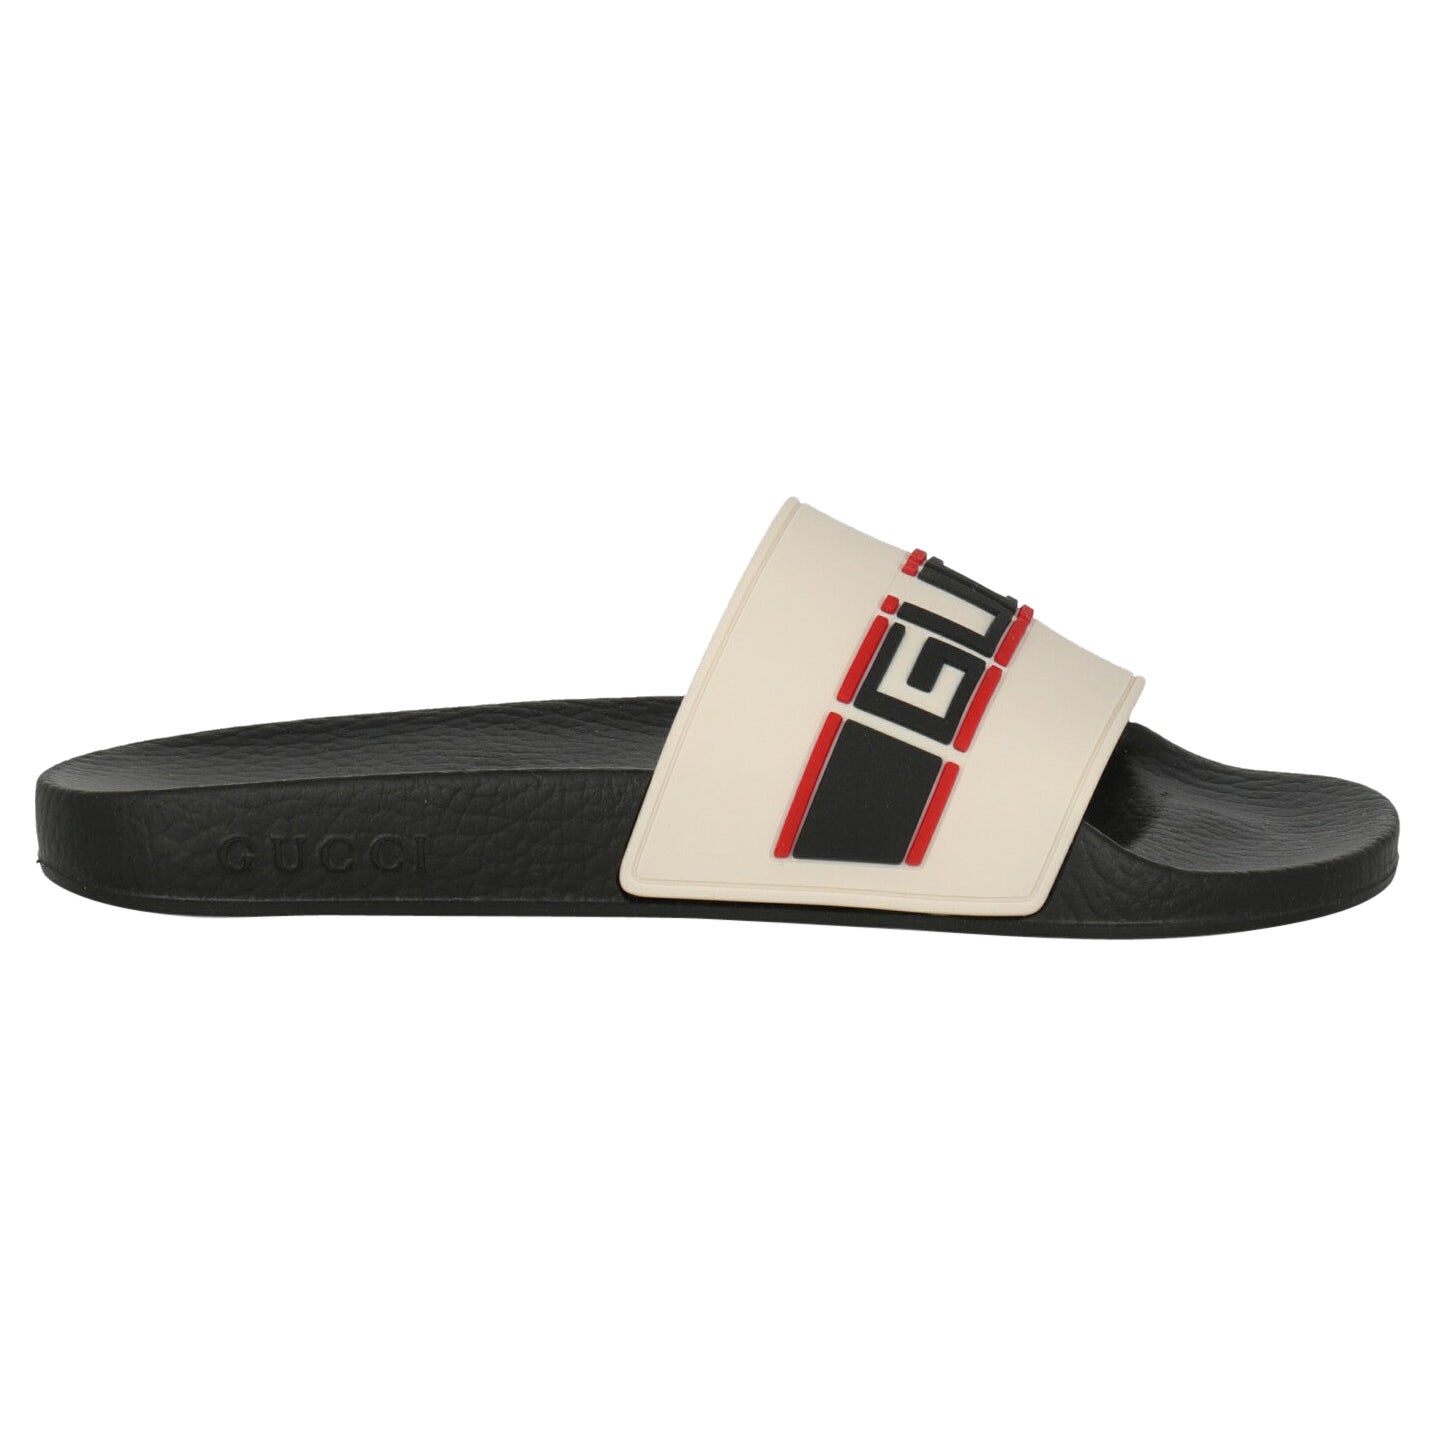 Gucci Women Slippers Black, Red, White Synthetic Fibers EU 39 For Sale